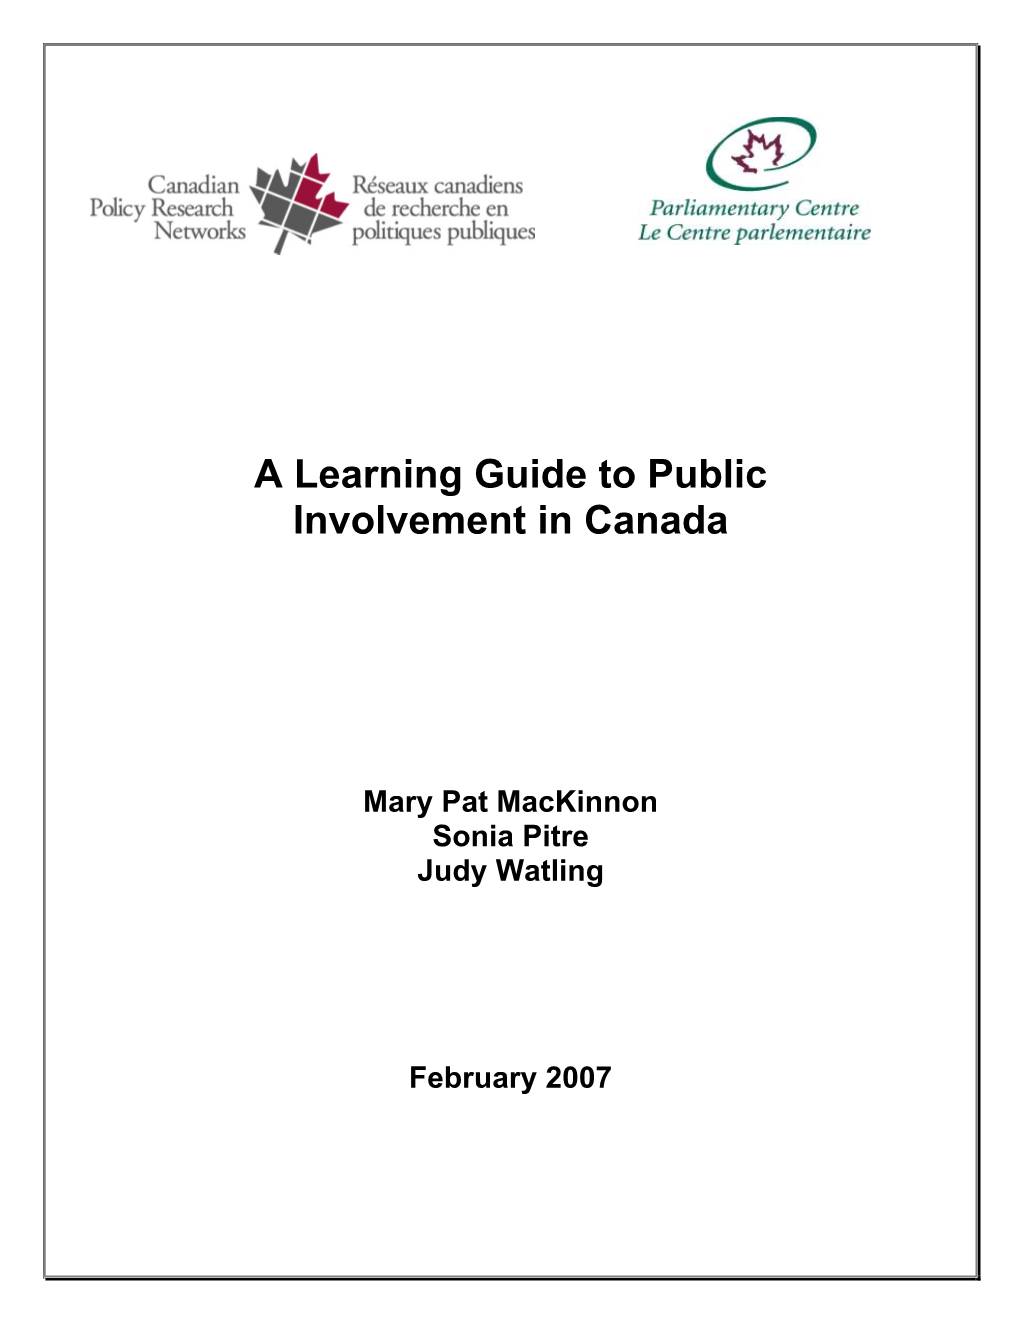 A Learning Guide to Public Involvement in Canada